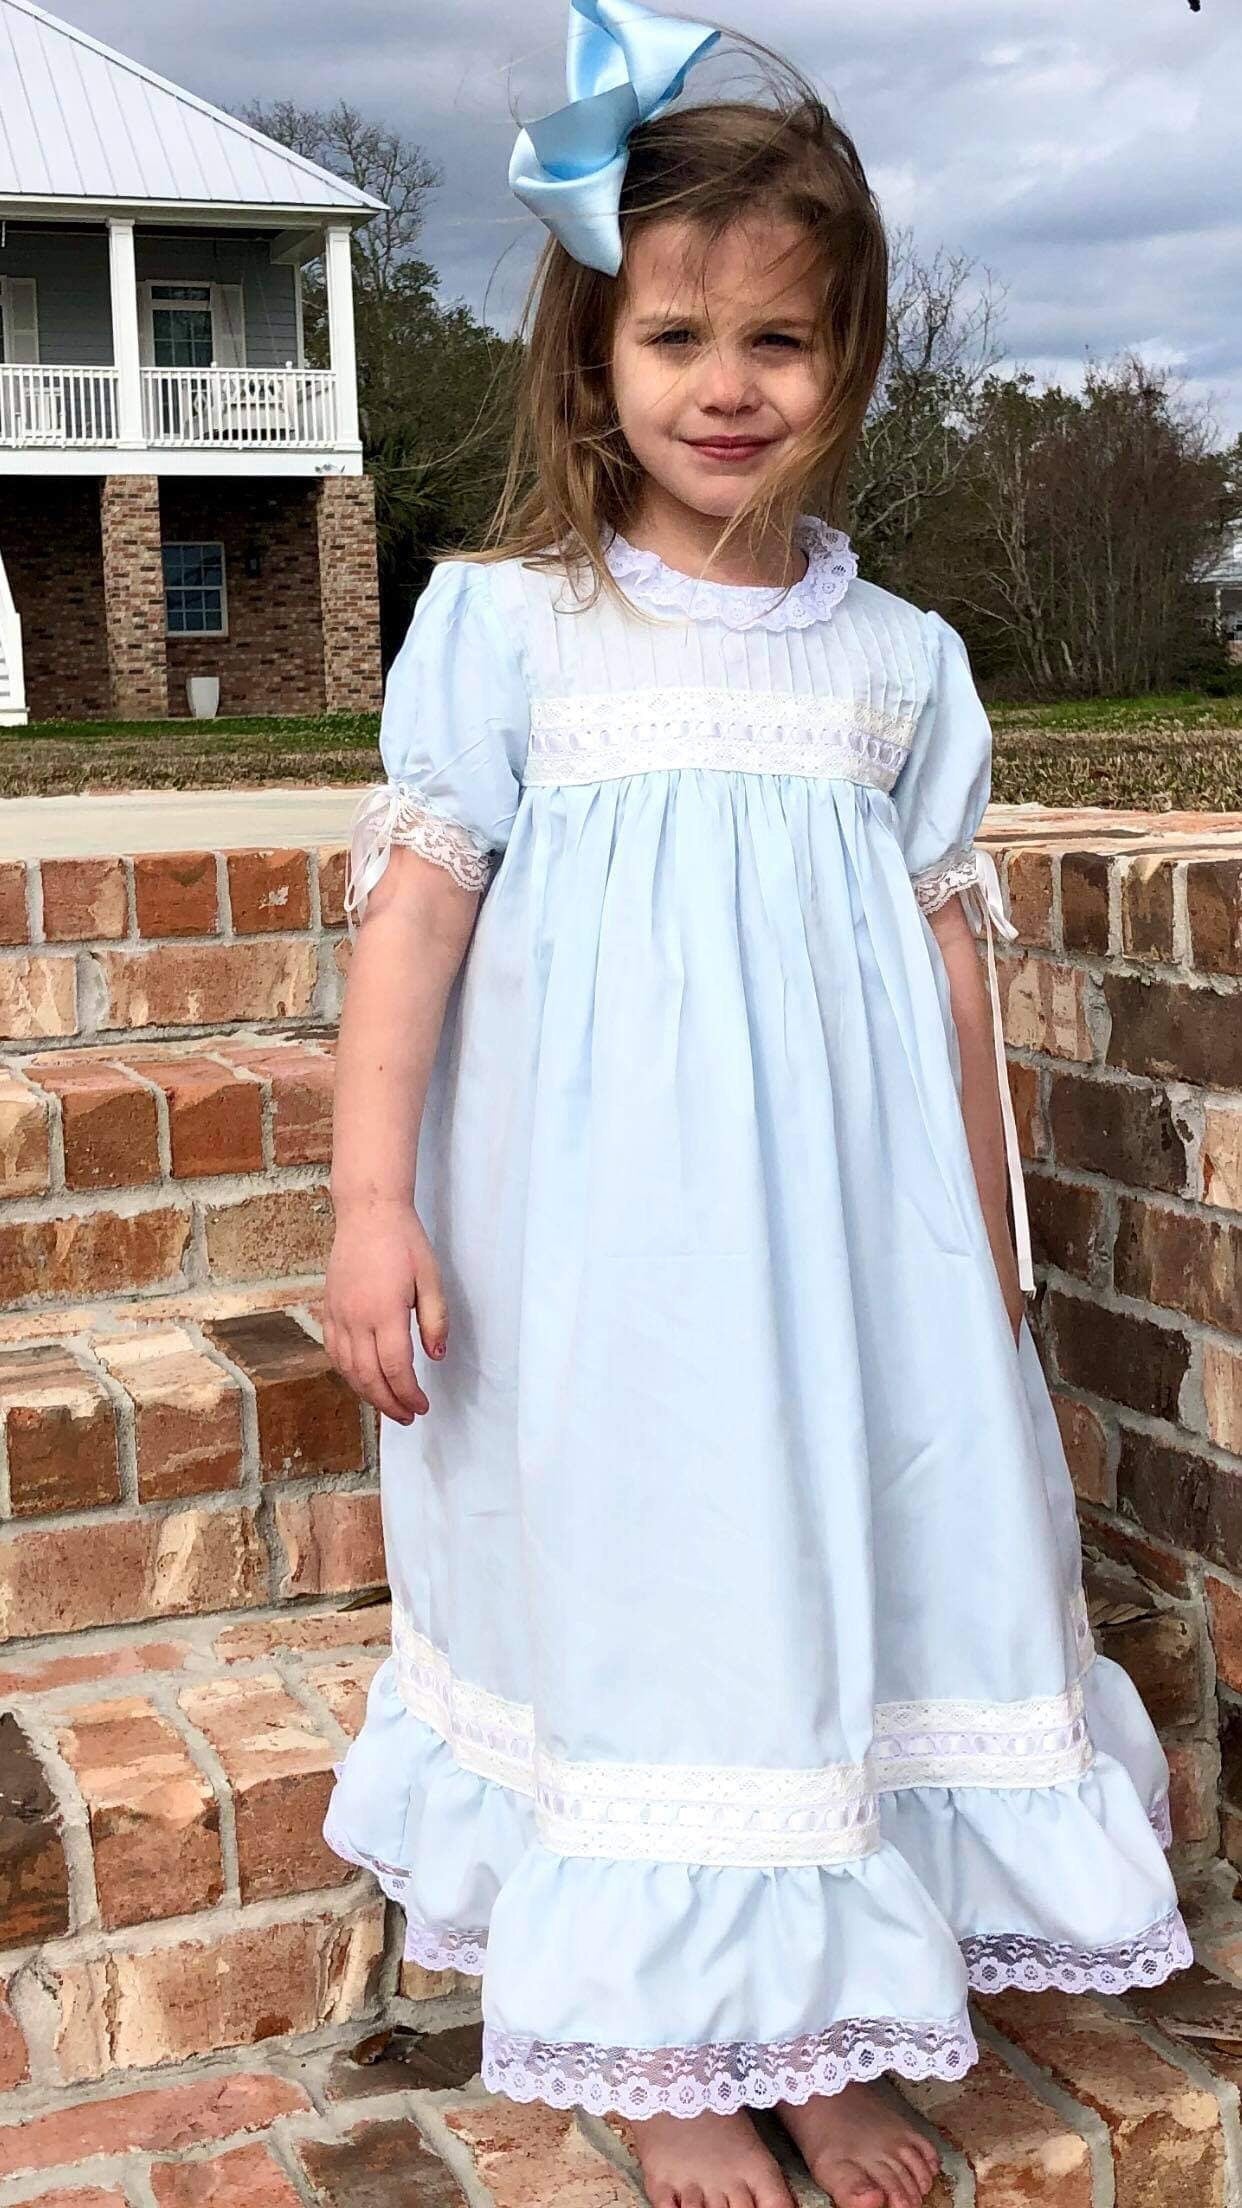 The Southern Belle Heirloom Dress in Blue